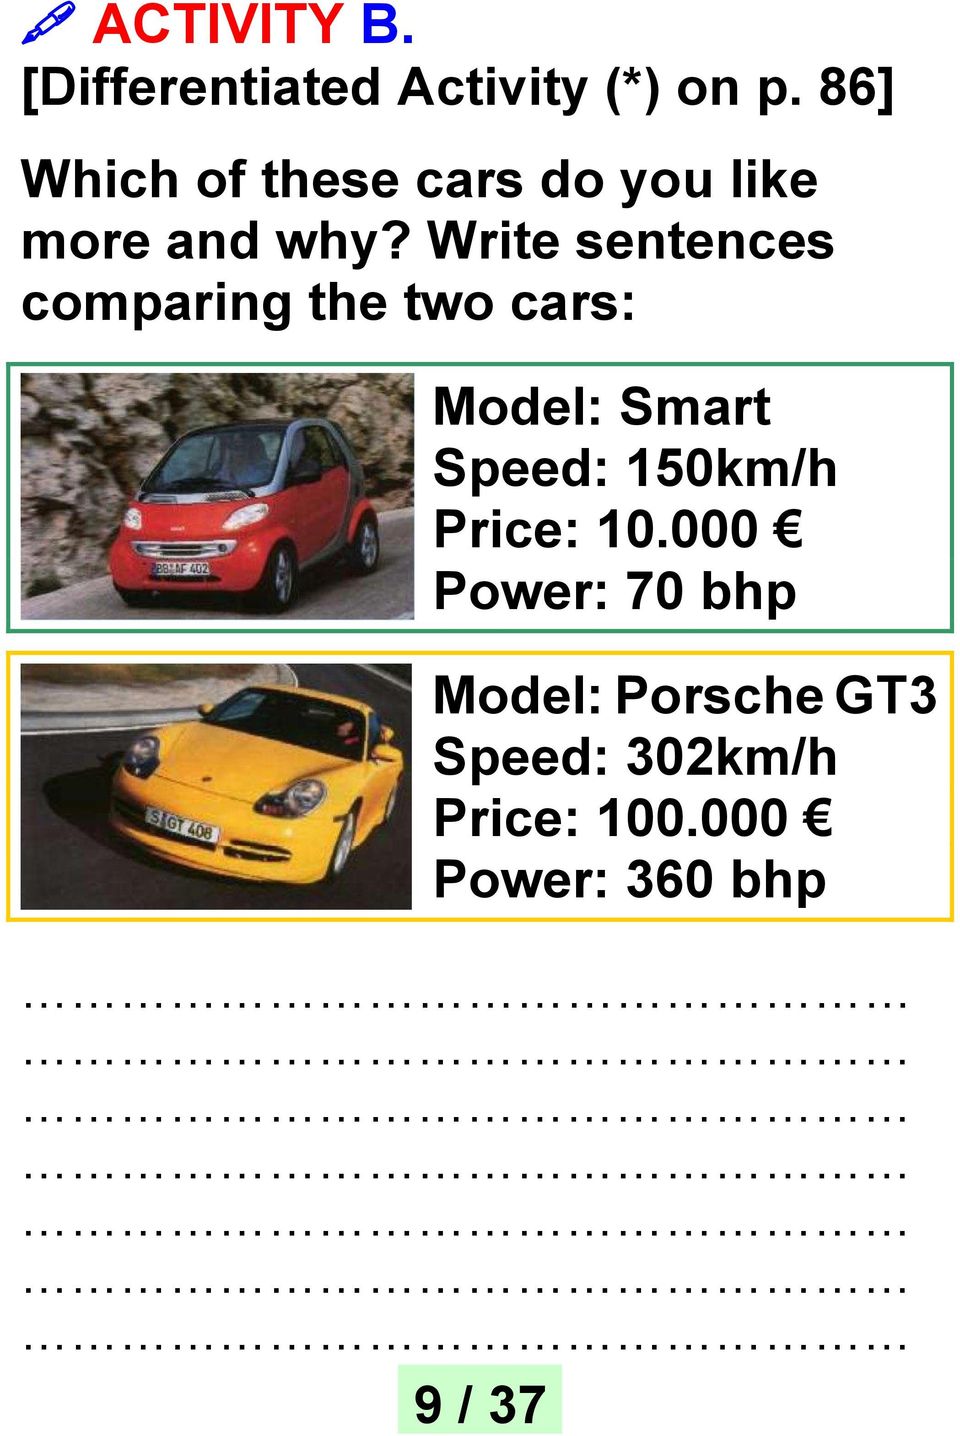 Write sentences comparing the two cars: Model: Smart Speed: